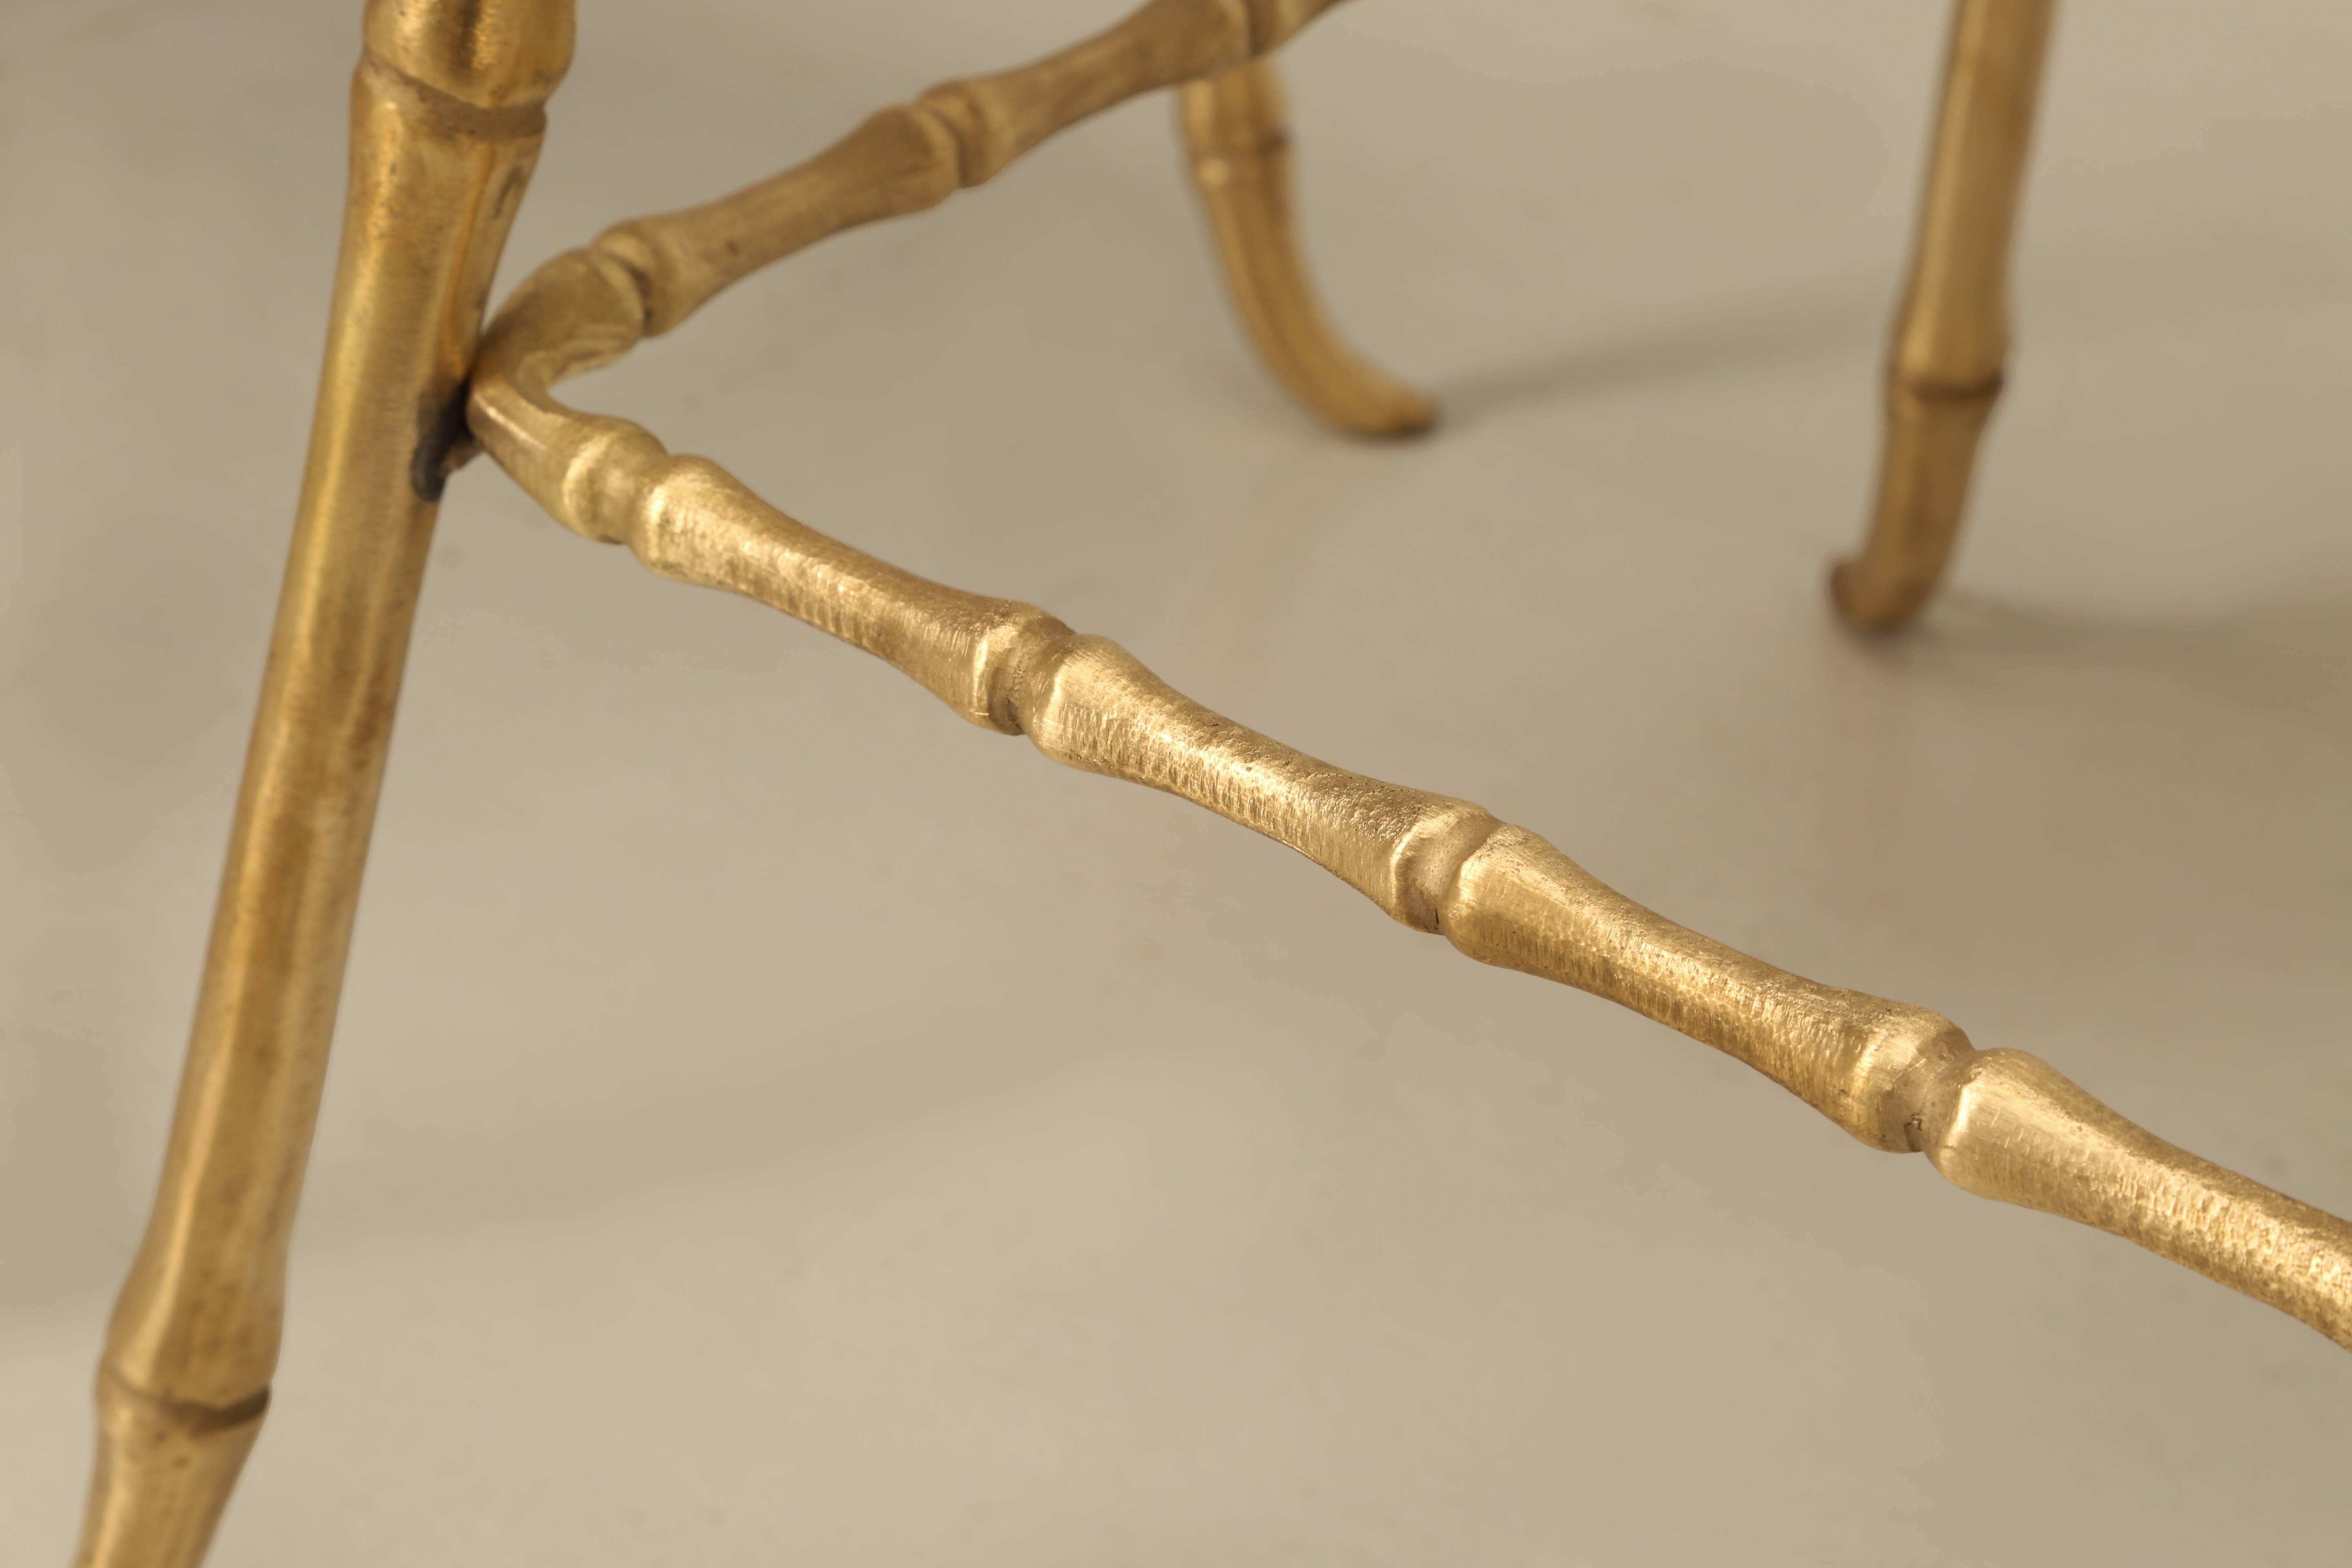 Mid-Century Modern Polished Solid Brass Counter Stools in a Jansen Inspired Faux Bamboo Design